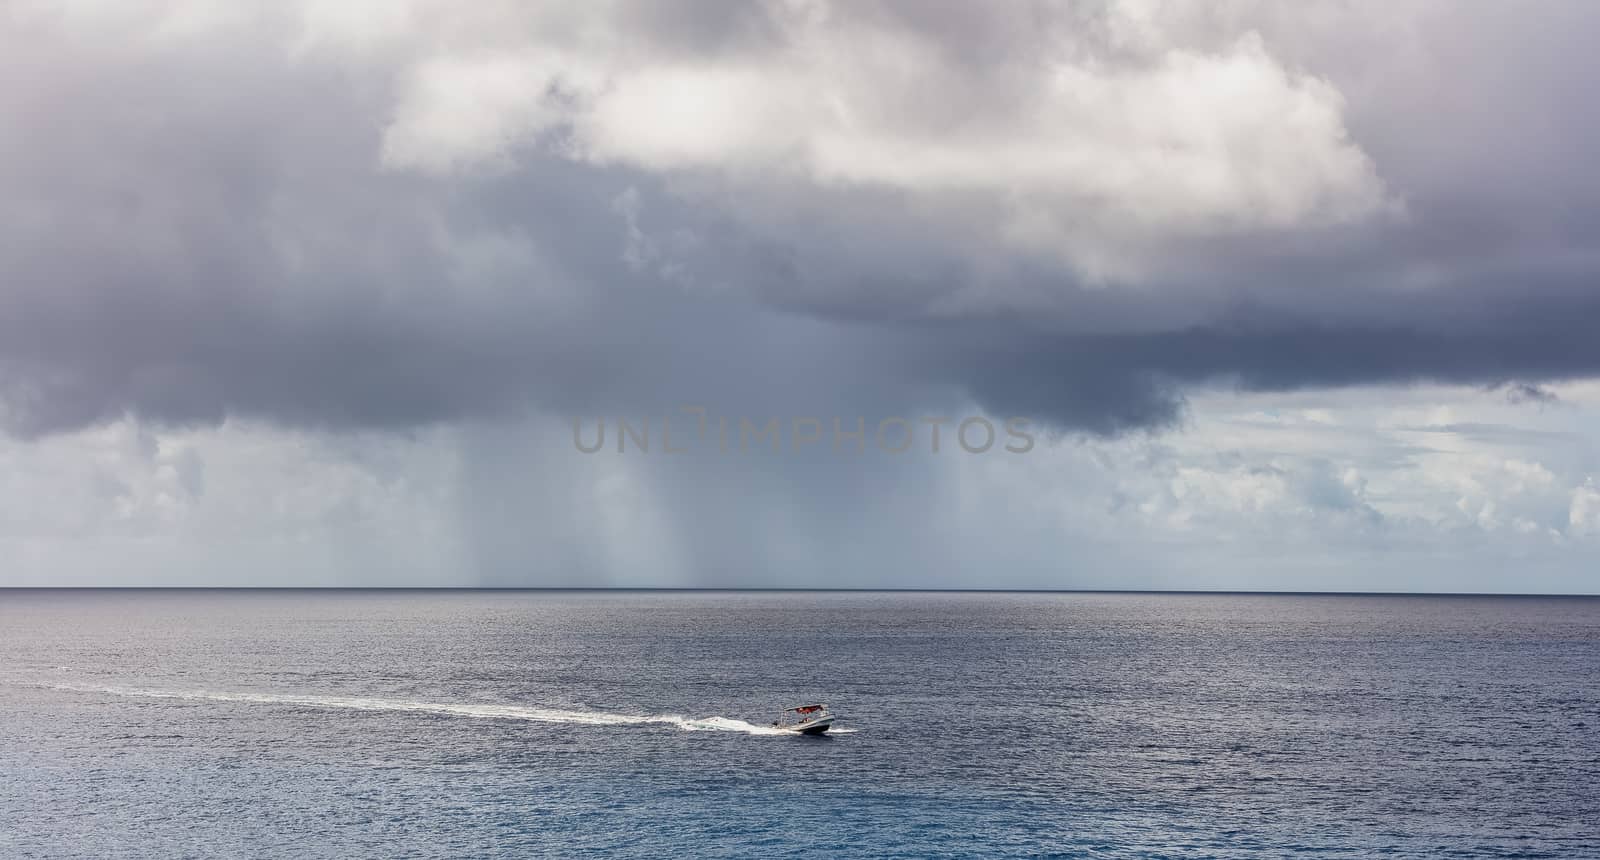 Fishing boat sailing by the island of Cozumel in Mexico. Stormy weather, clouds and rain in the background